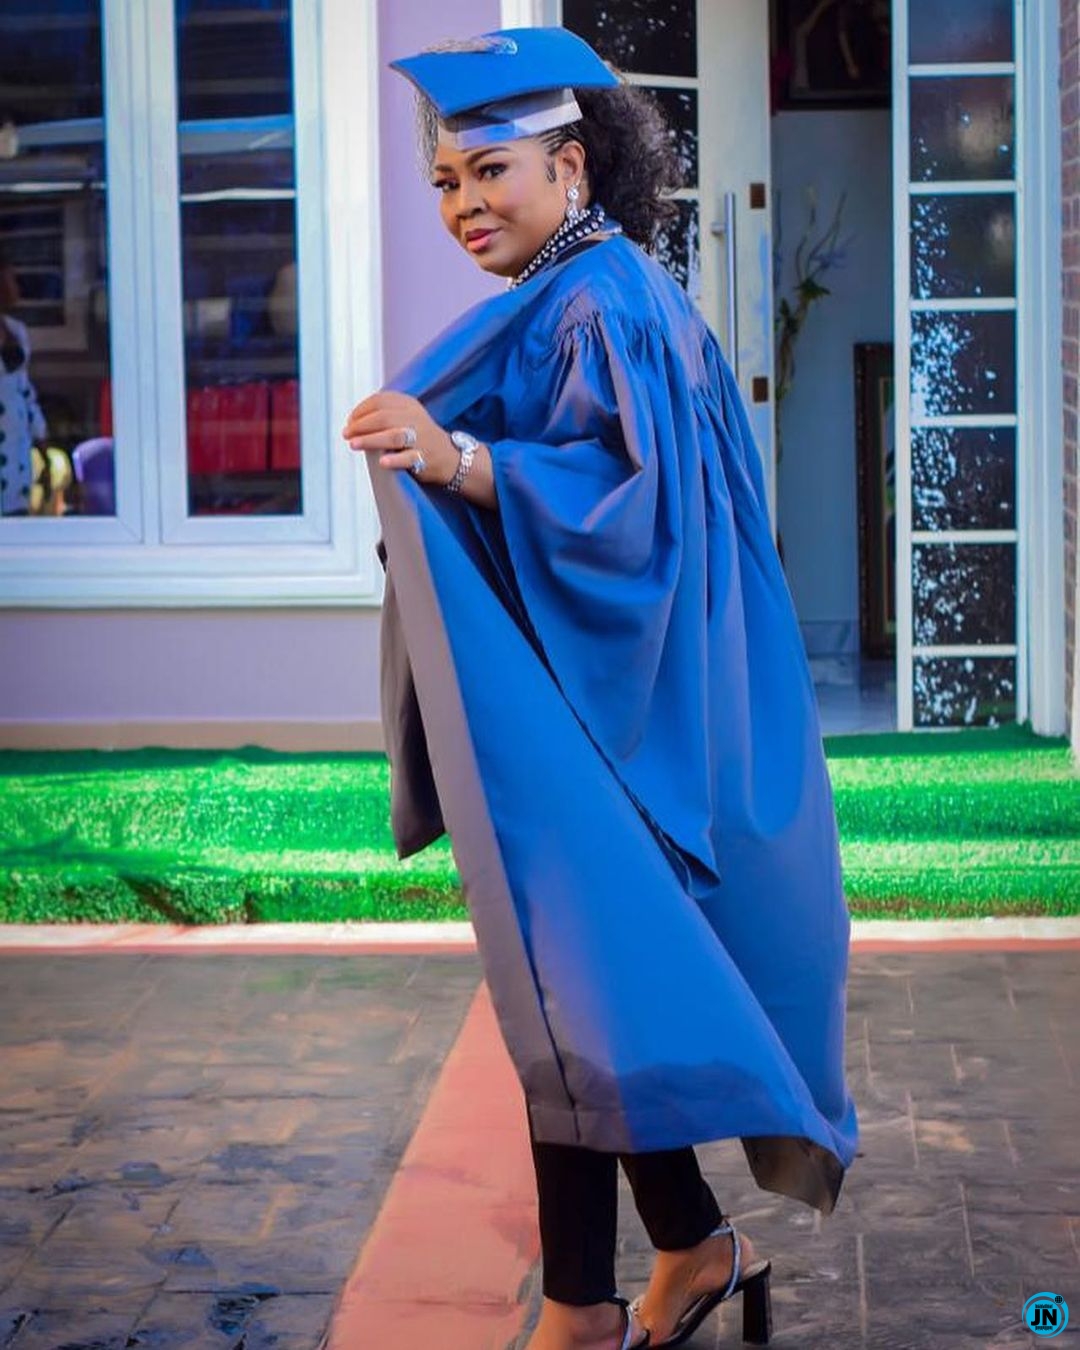 Rita Daniels, Regina Daniels' mother, receives a law degree and shares photos from the convocation...